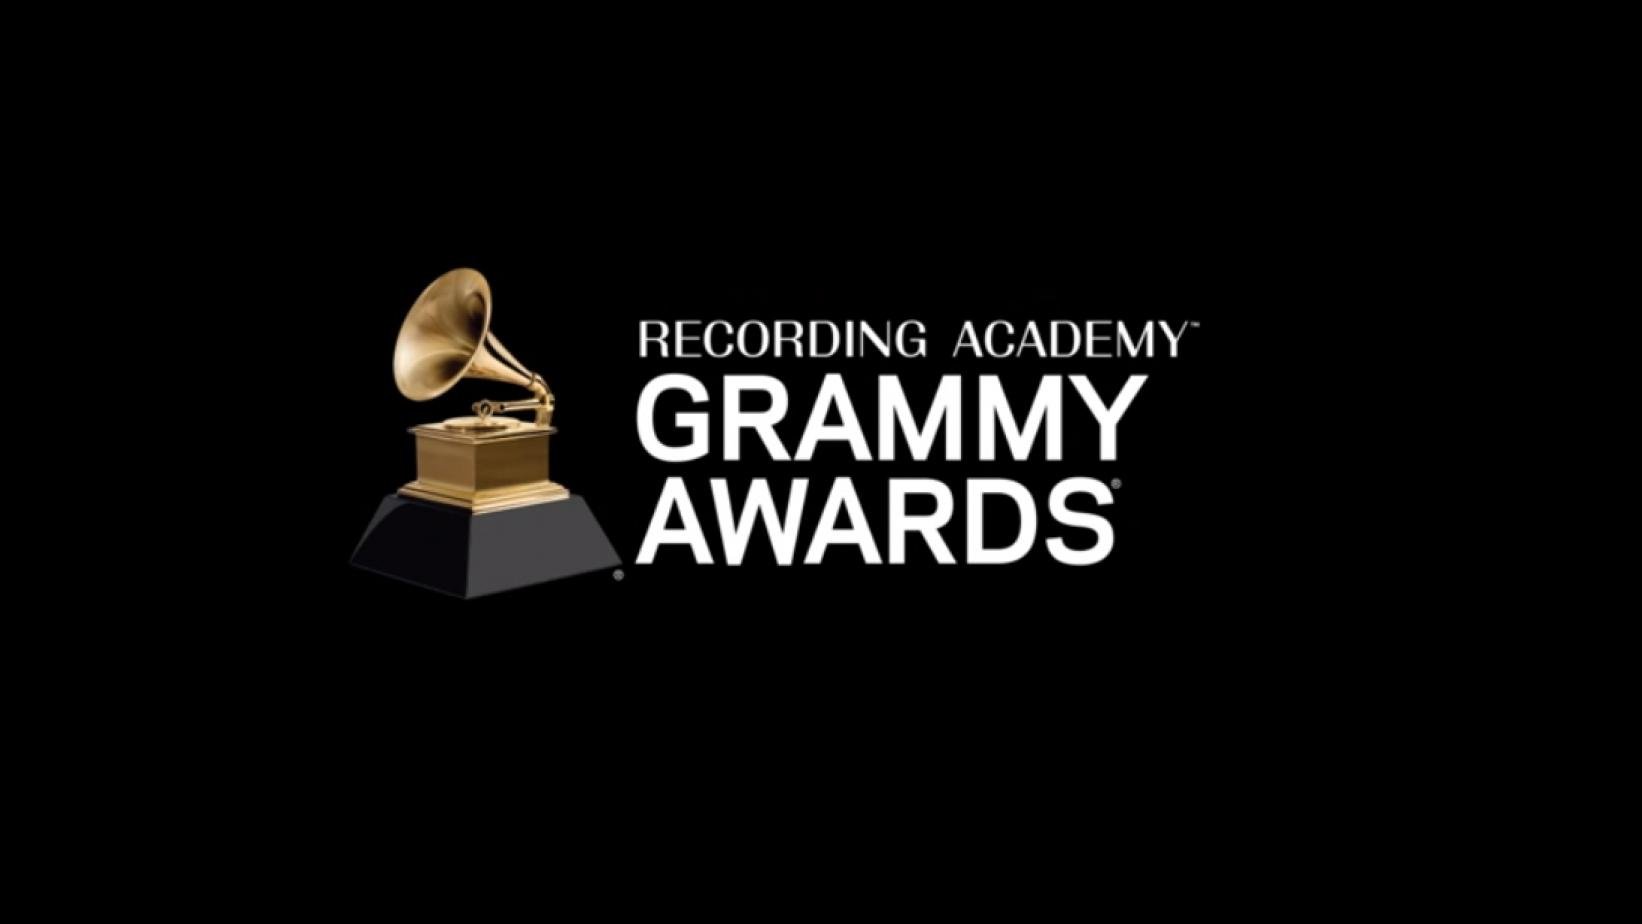 Billy Strings Grammy 2022 Nomination Is Billy strings up for a Grammy